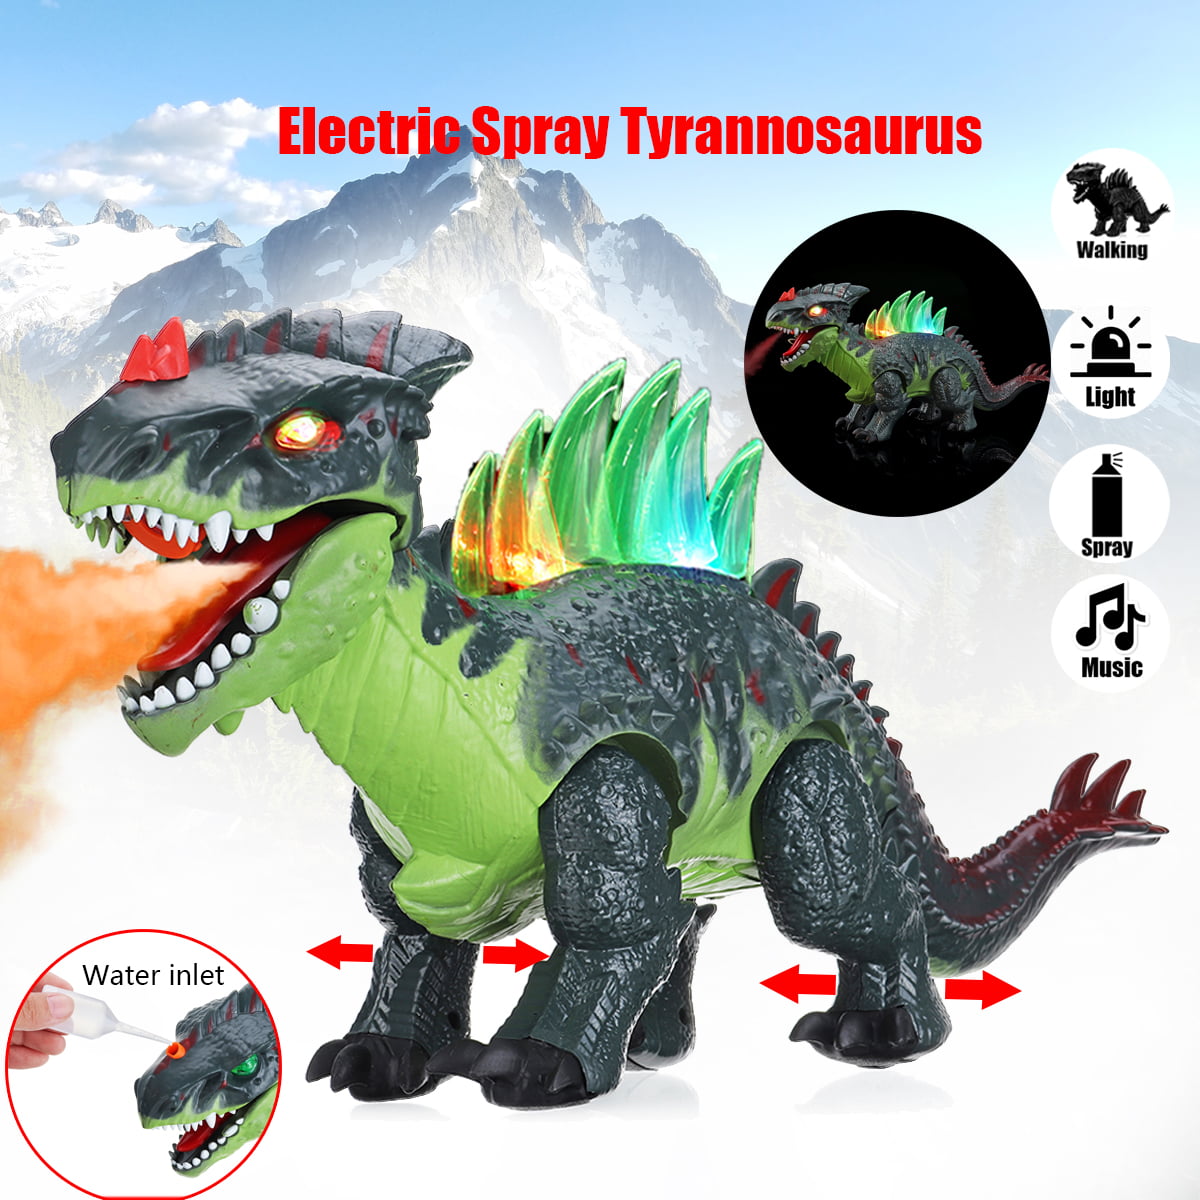 Roaring Sounds,Light up Eyes T-rex Dinosaur Jurassic World Electronic Tyrannosaurus Toys Battery Operated with Water Mist Spray Walking Motion and 3D Projection for kids Age 3-7 blue Laying Eggs 